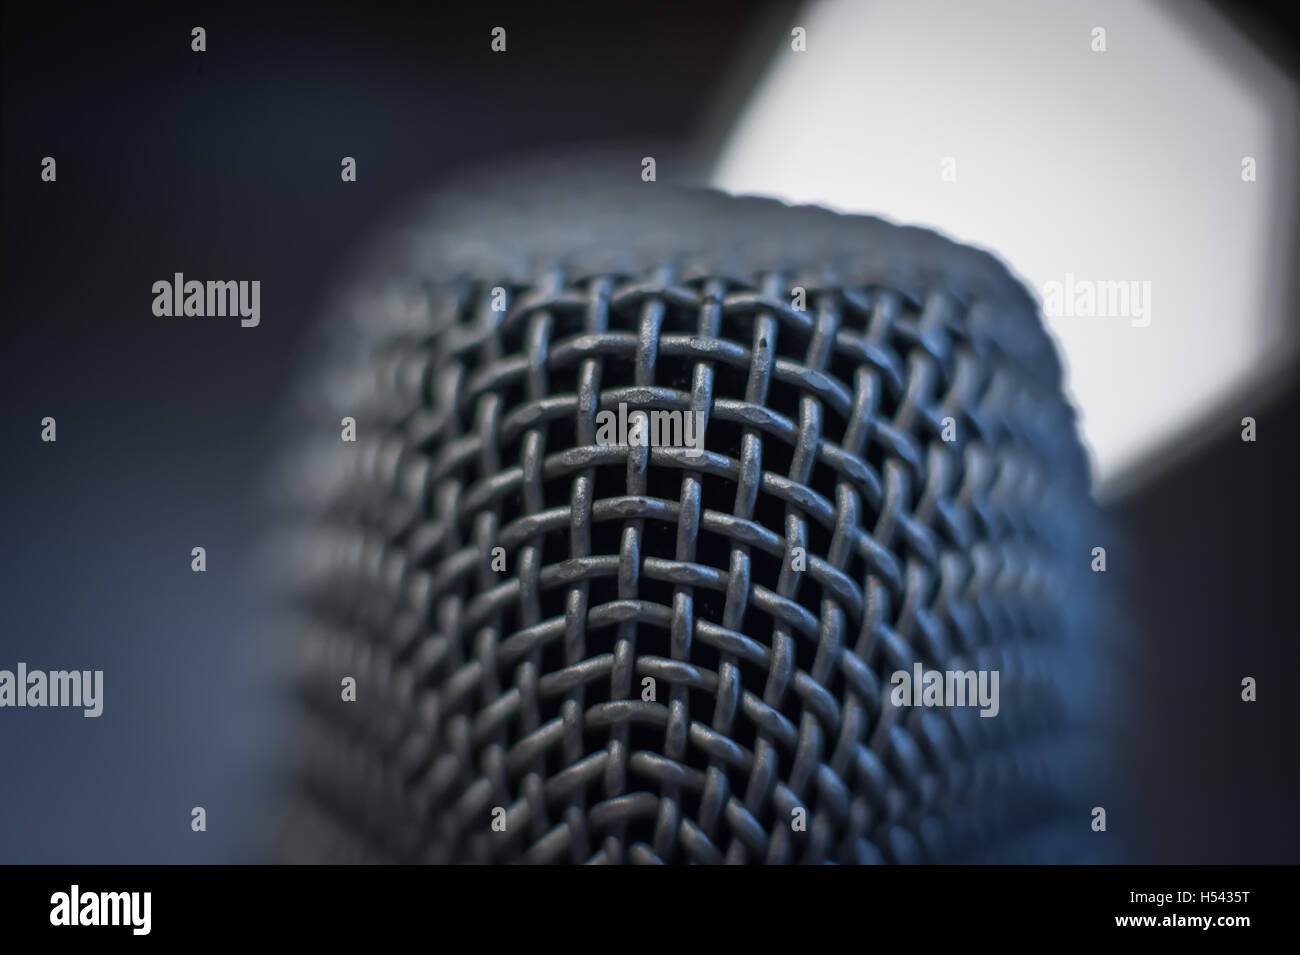 Modern black studio microphone head macro close up with out of focus cold blue light upper right background Stock Photo